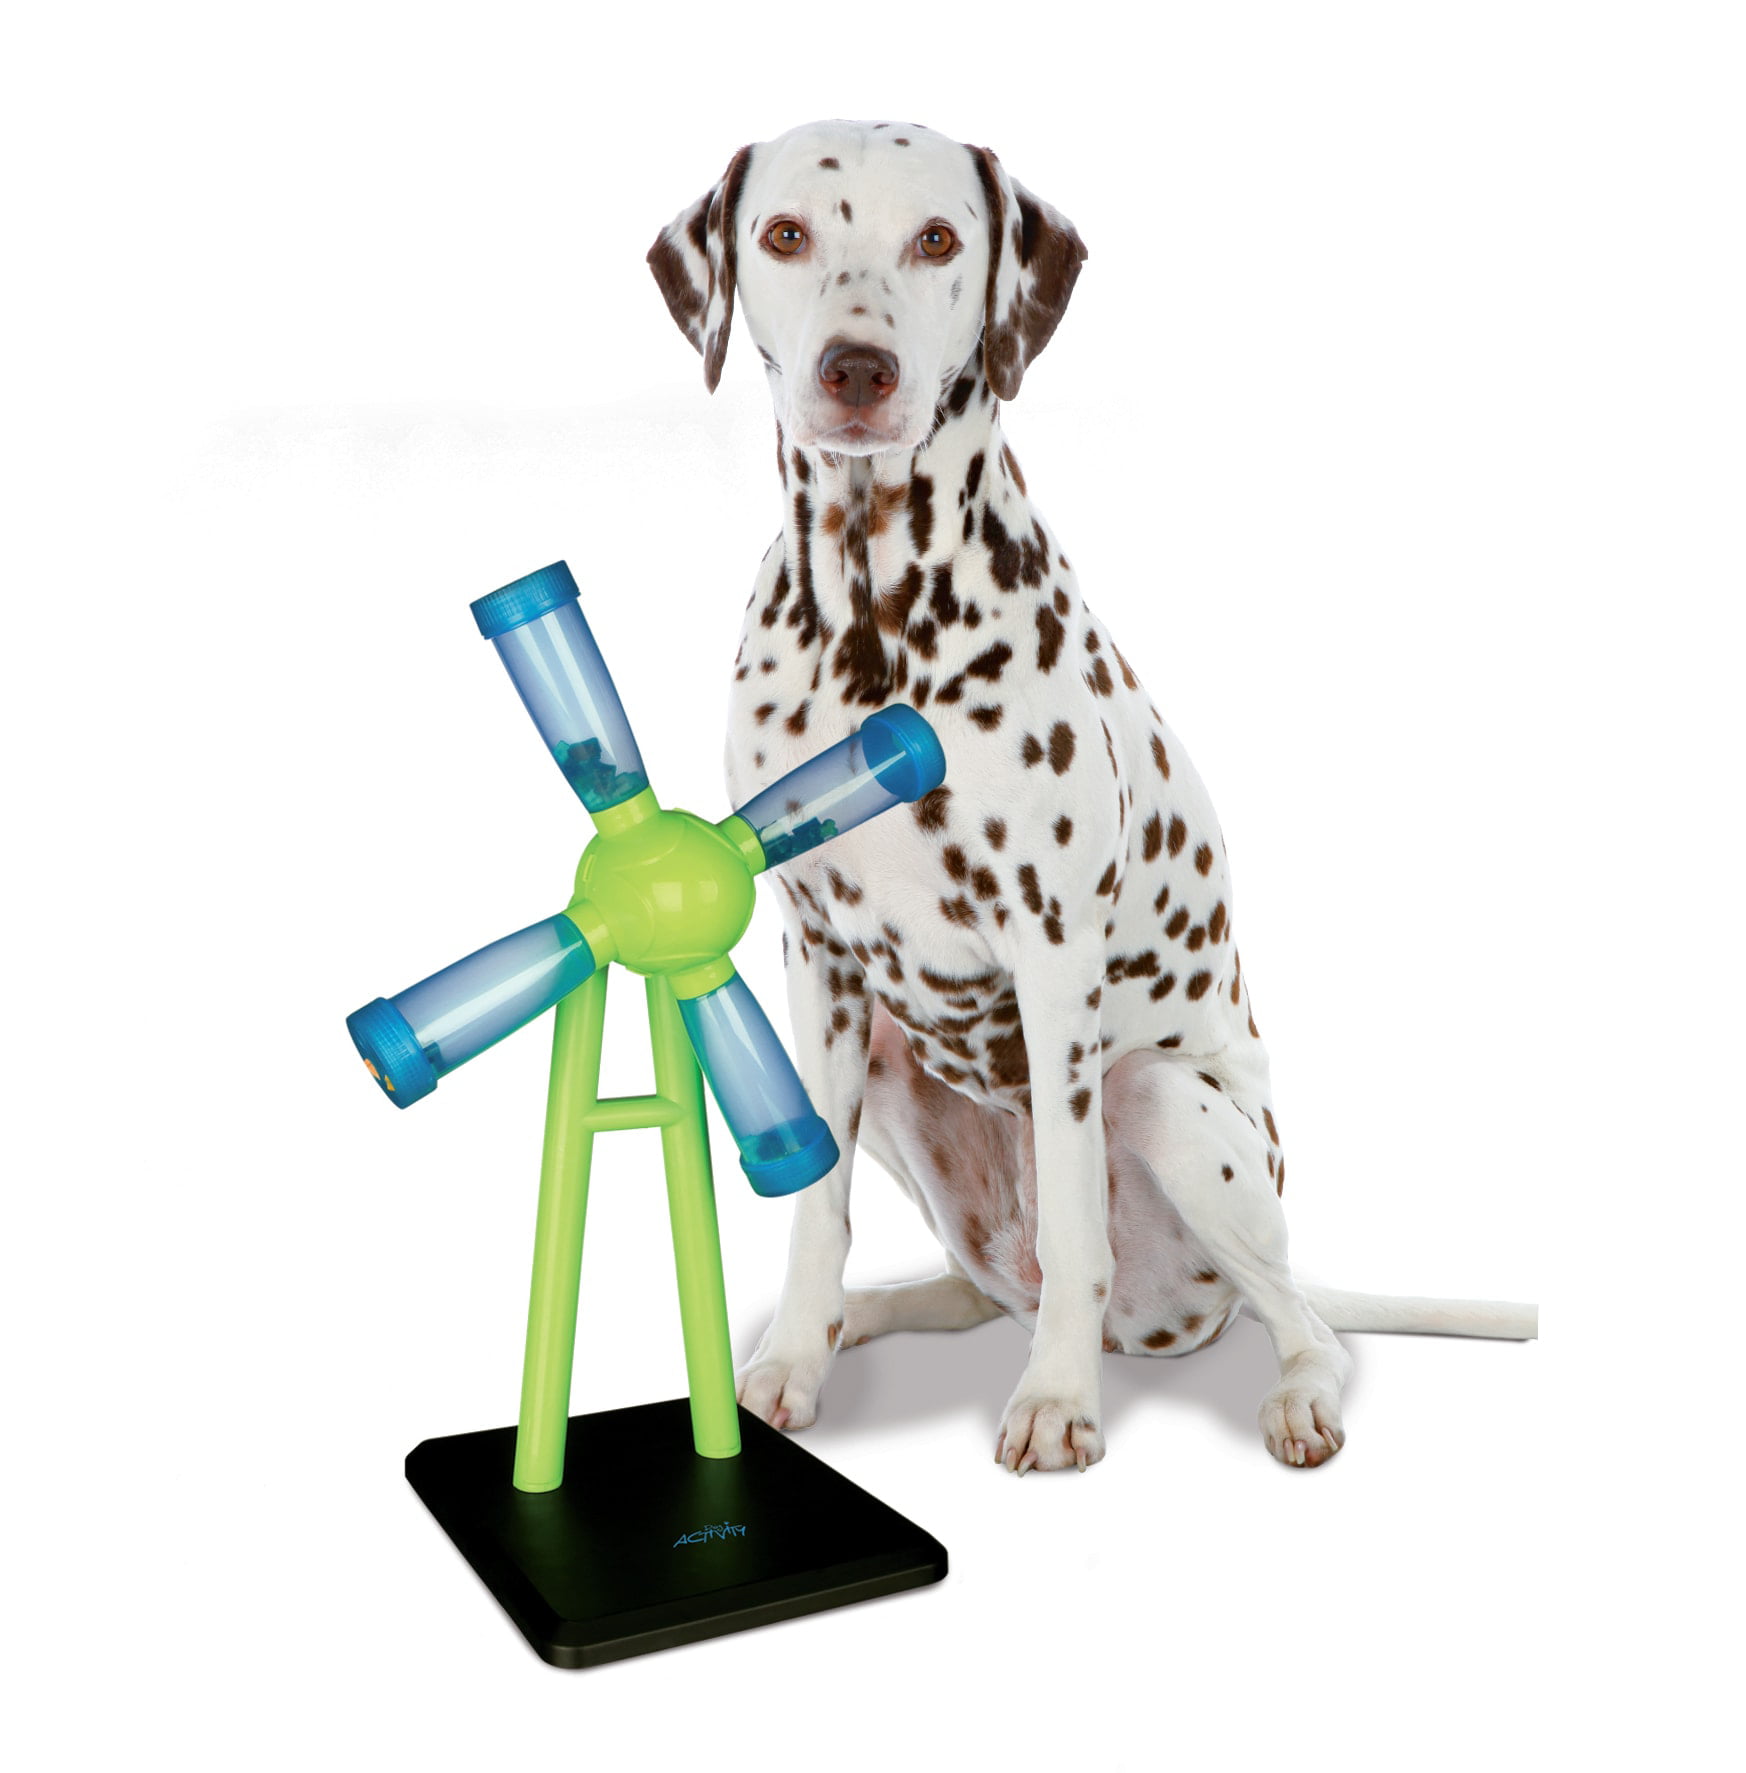 Trixie Flower Tower Dog Activity Strategy Game